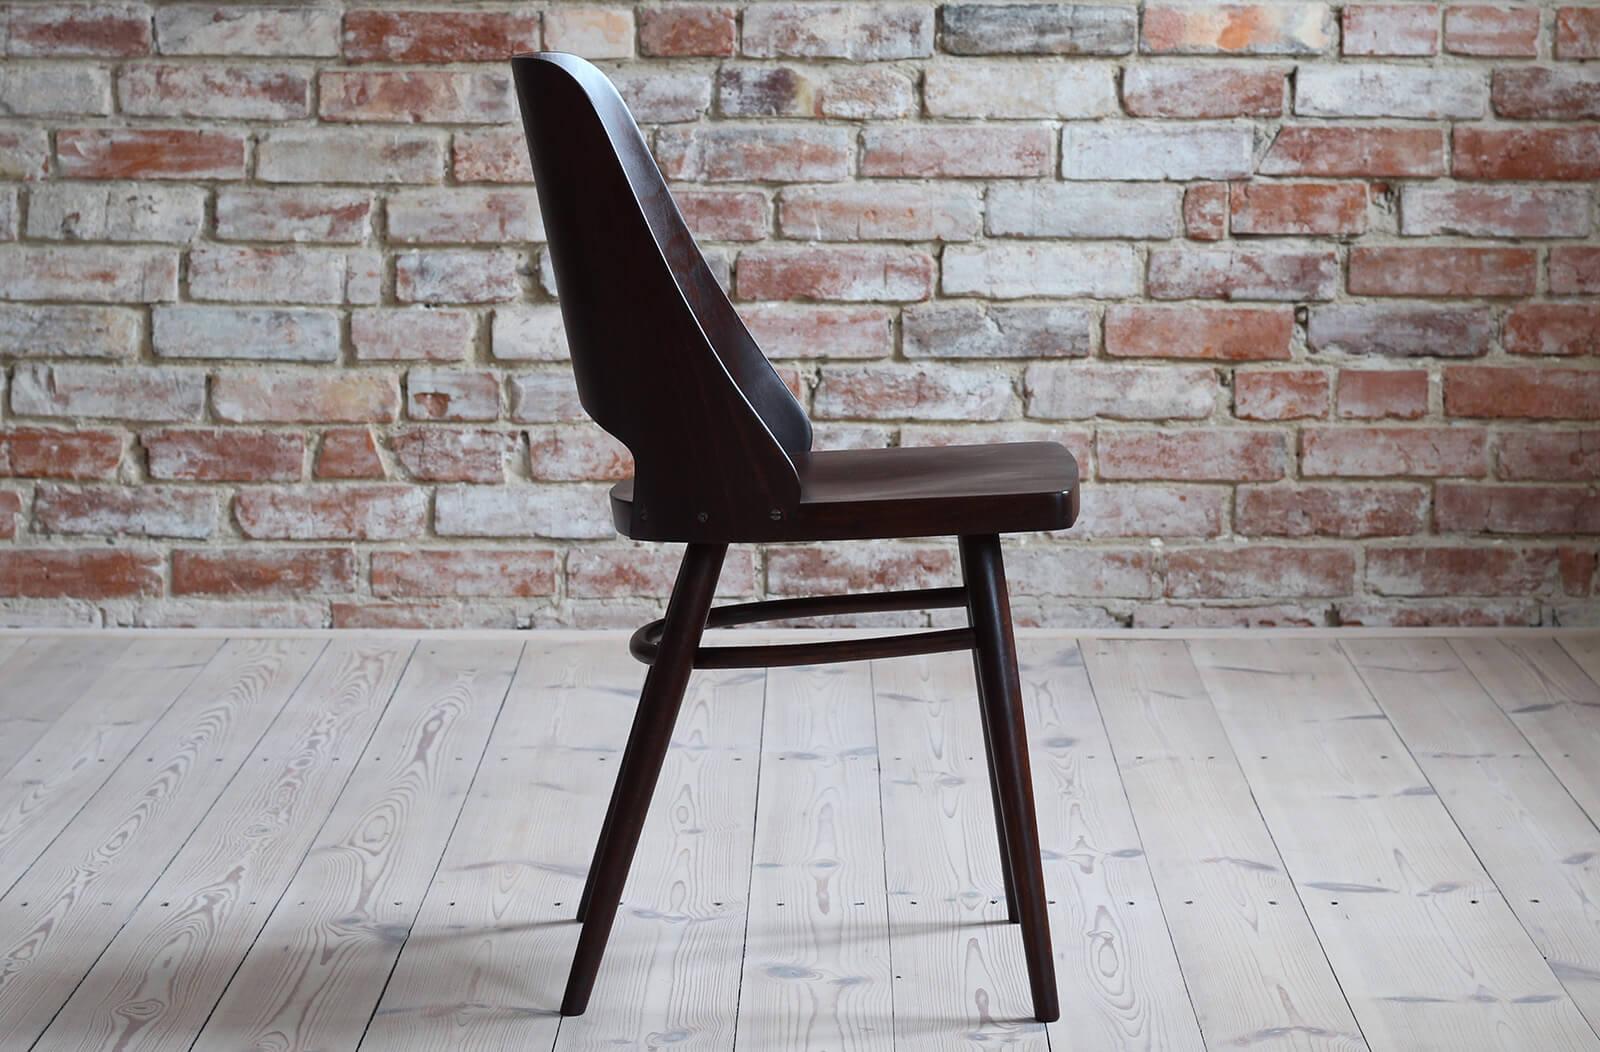 Set of 4 Dining Chairs by Radomir Hofman for TON, Model 514, Beech Veneer In Good Condition For Sale In Wrocław, Poland